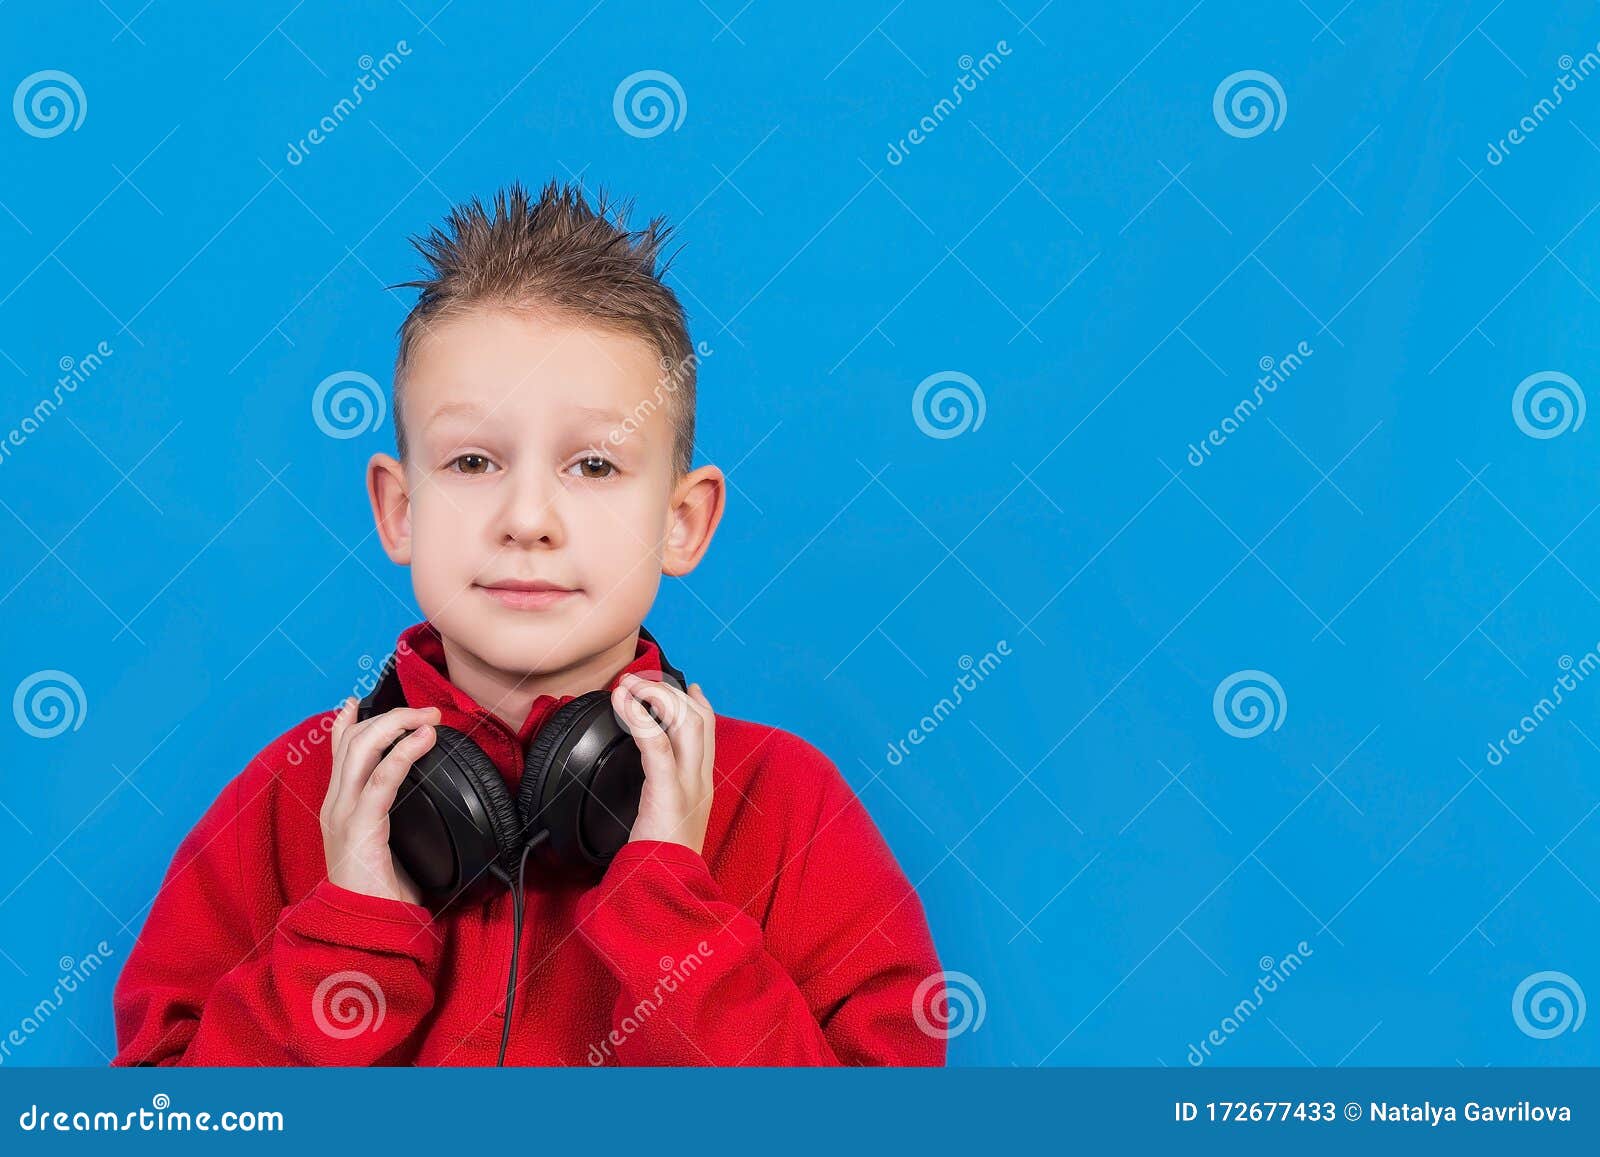 Boy with blue hair and headphones - wide 3